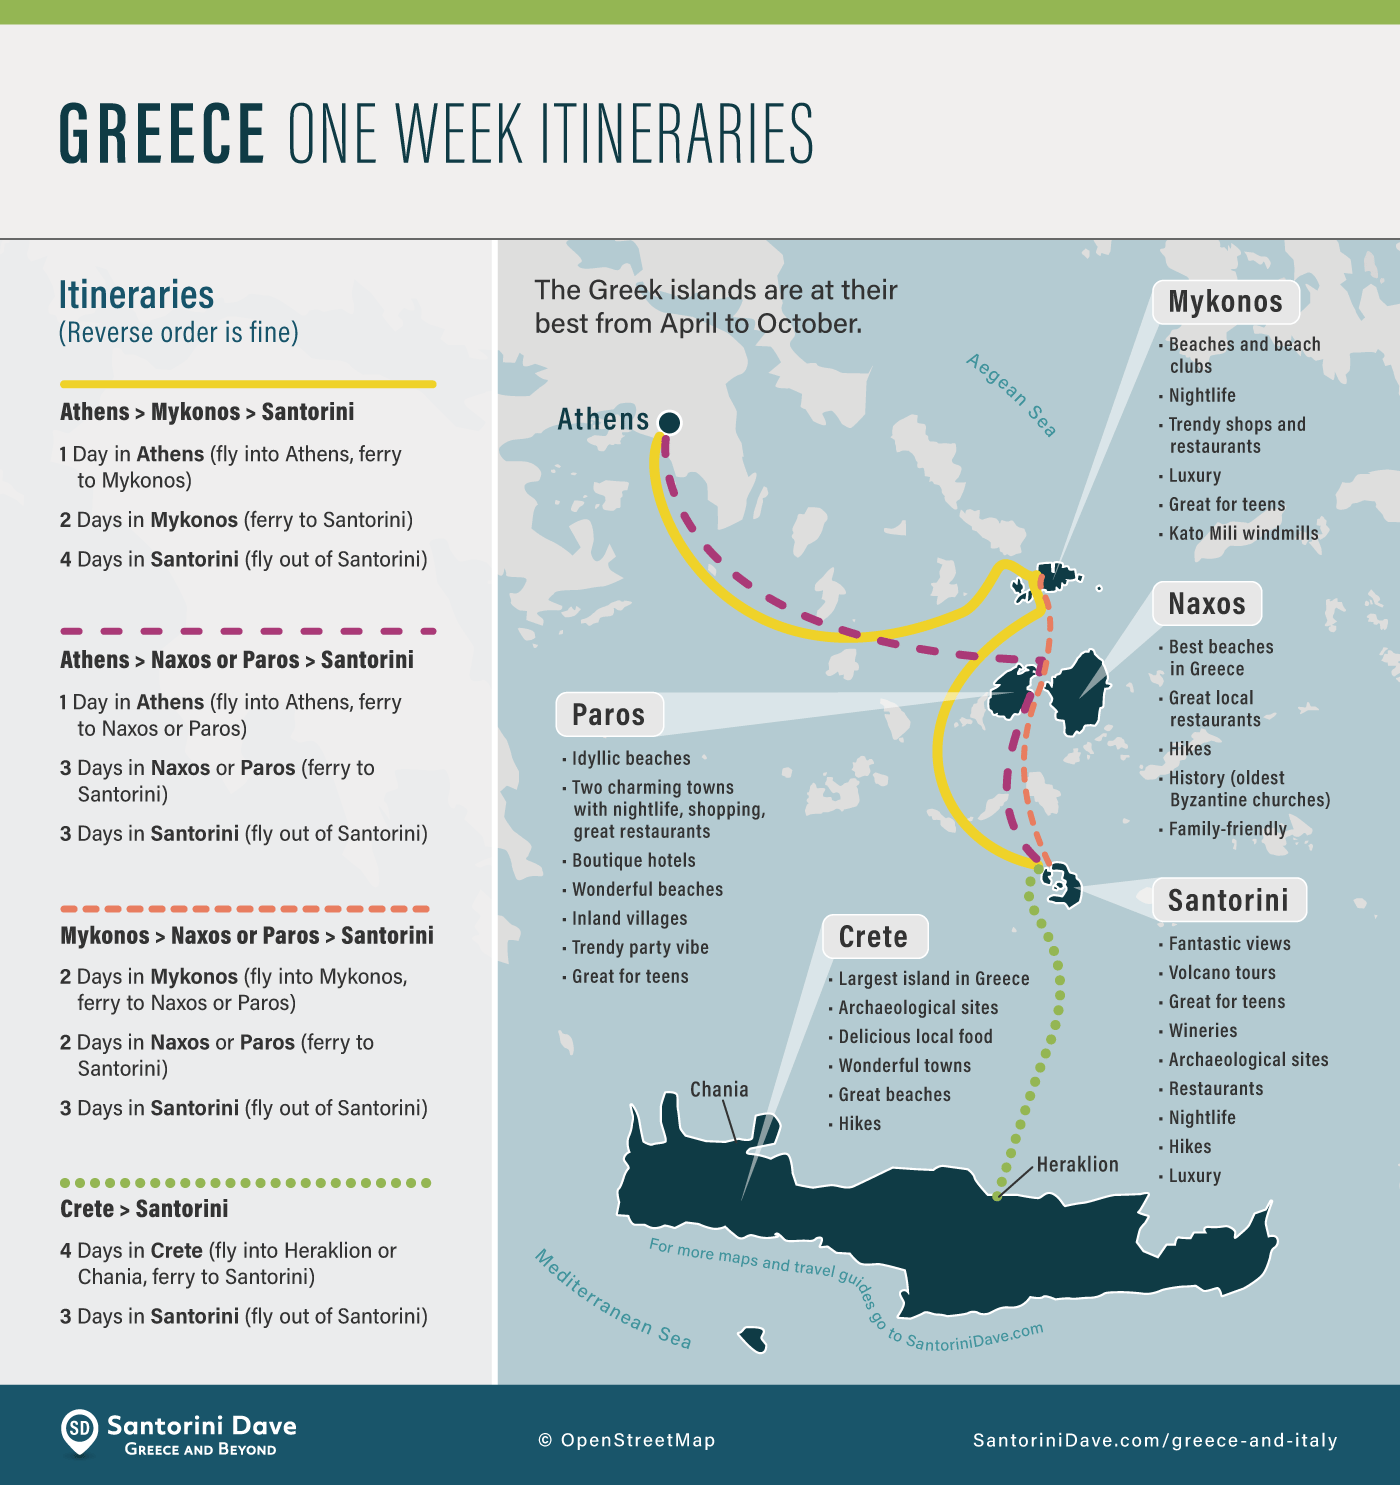 Map of suggested itineraries for one week in Greece